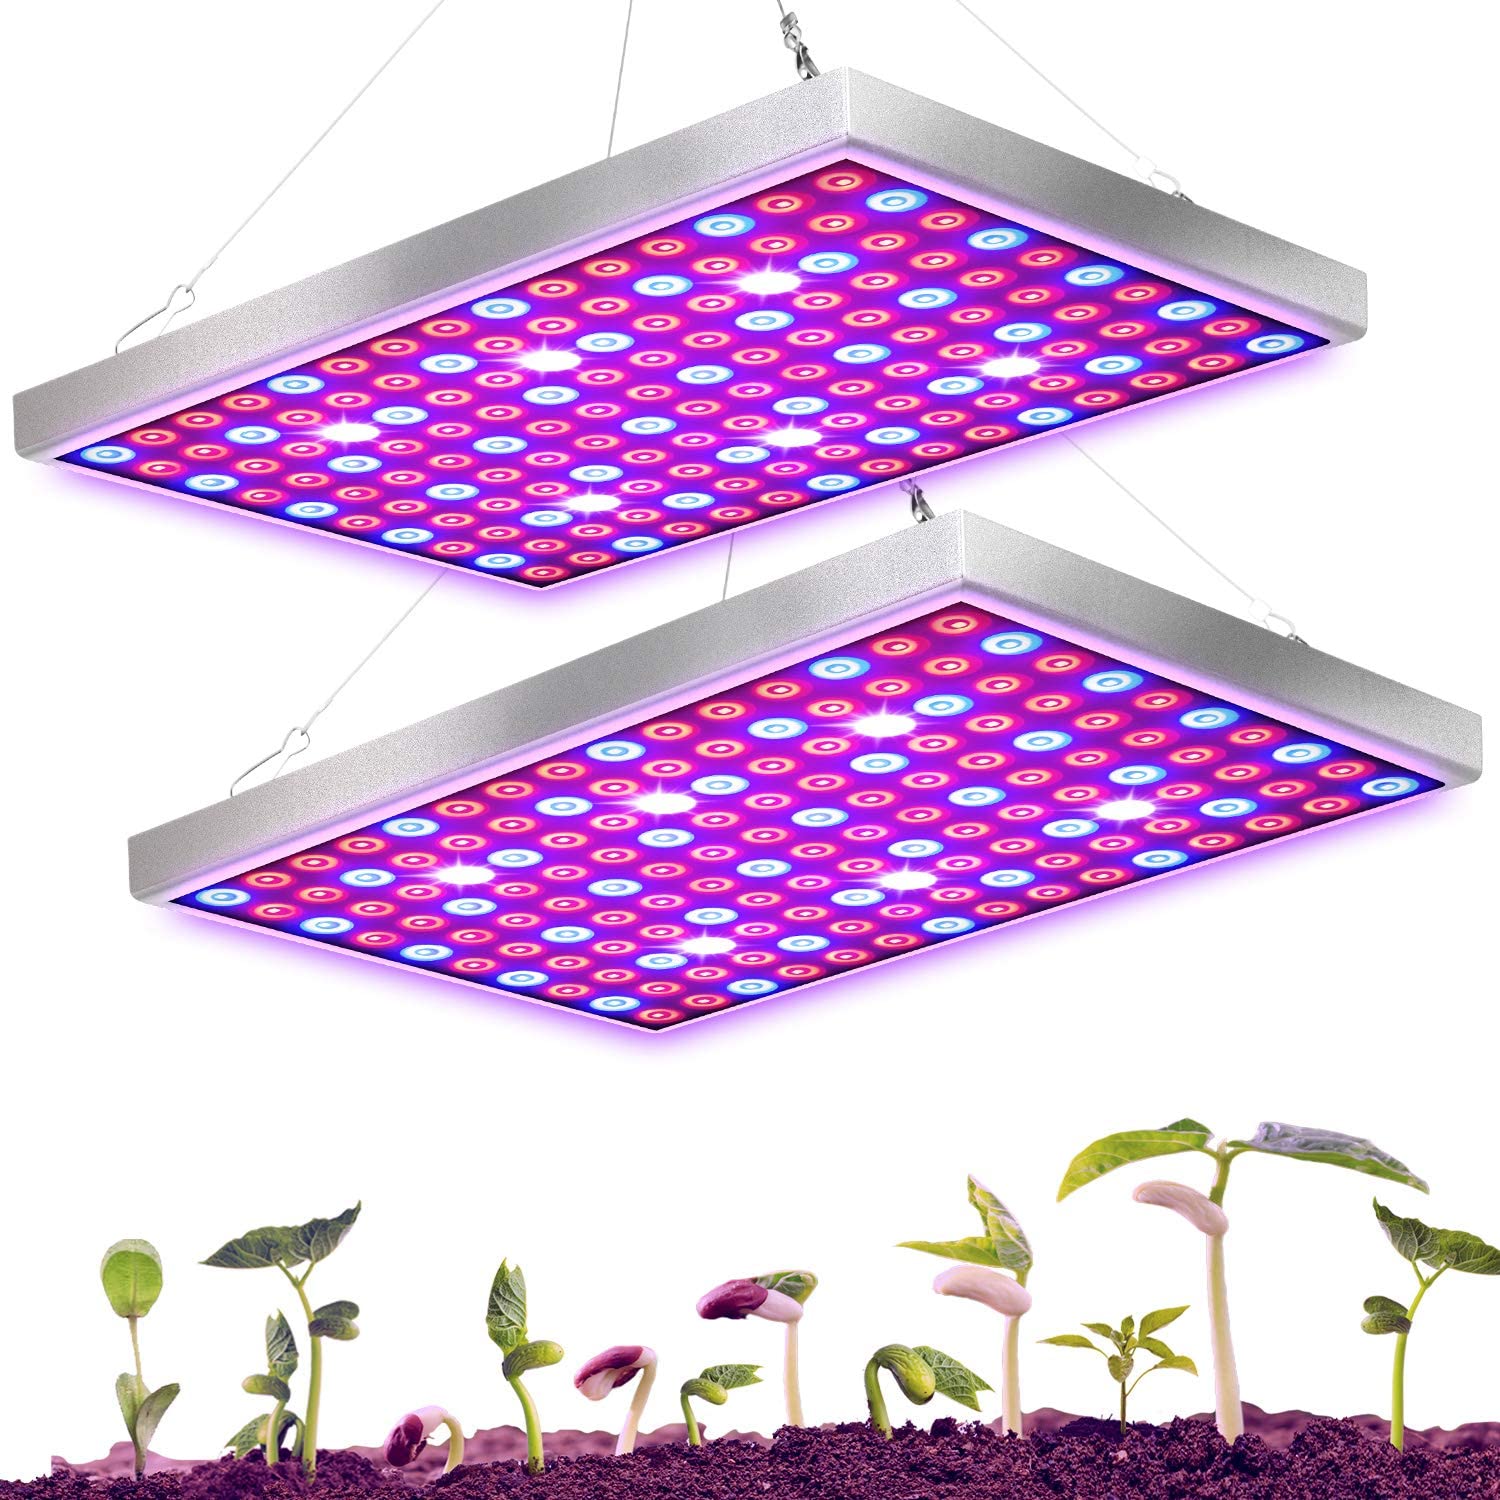 LED Grow Light for Indoor Plants, 45W Pl